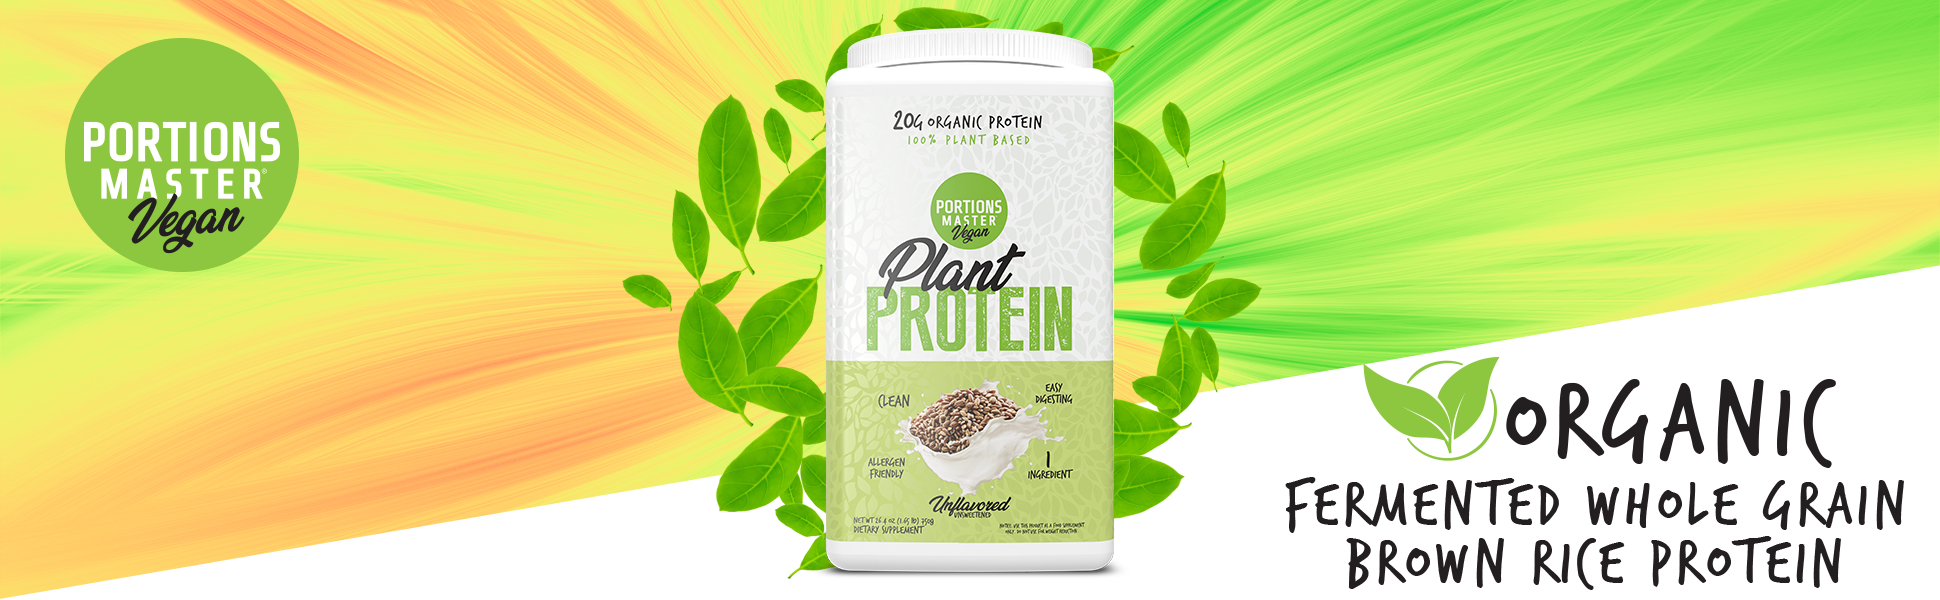 Unflavored Plant Protein Banner